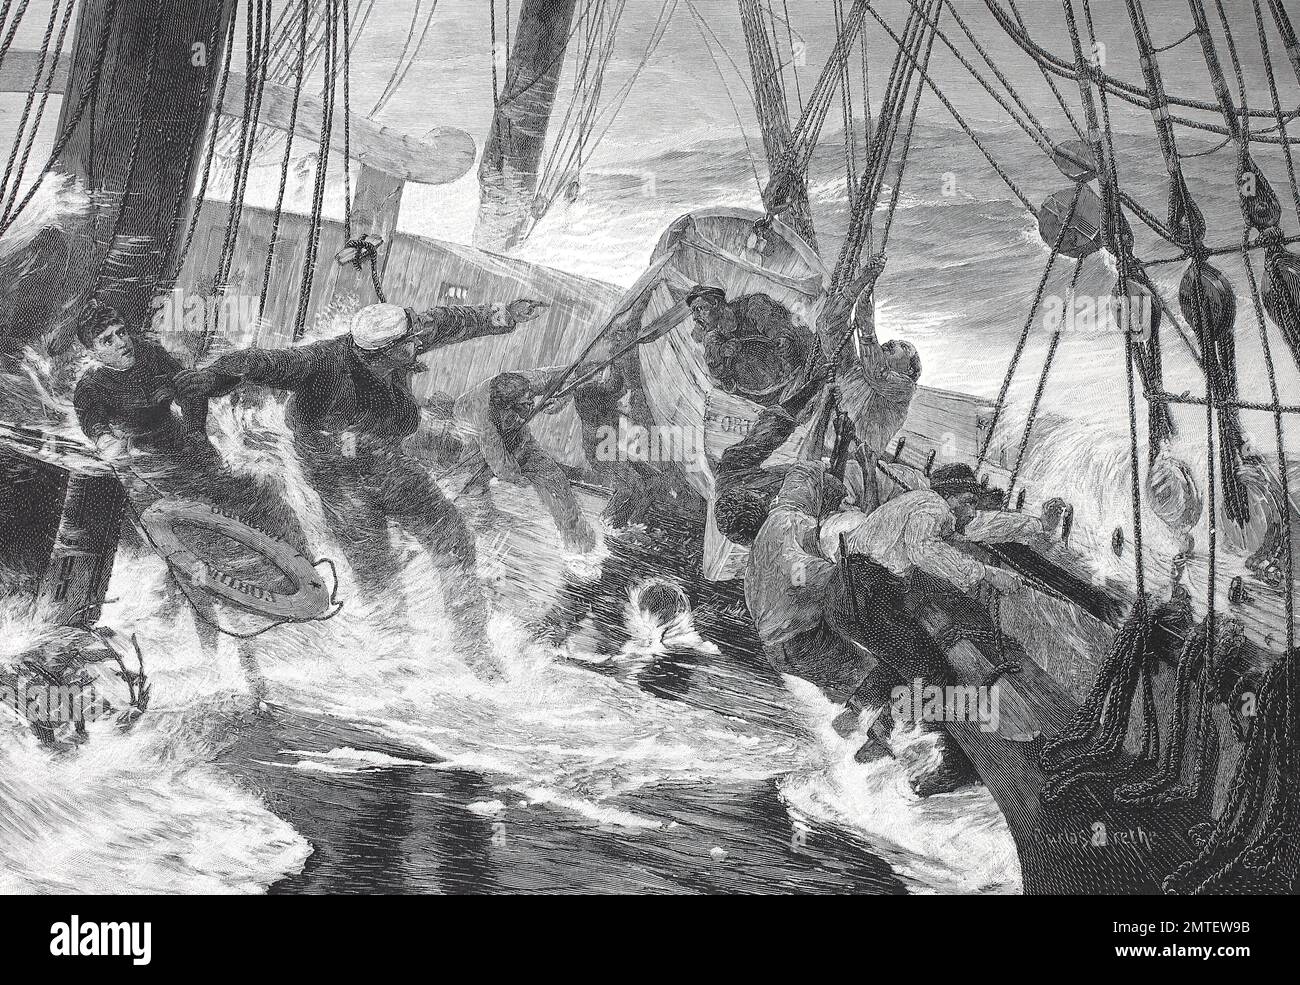 Shipwrecking is the event that caused the wreck, such as the striking of something that causes the ship to sink, illustration published in 1880 Stock Photo